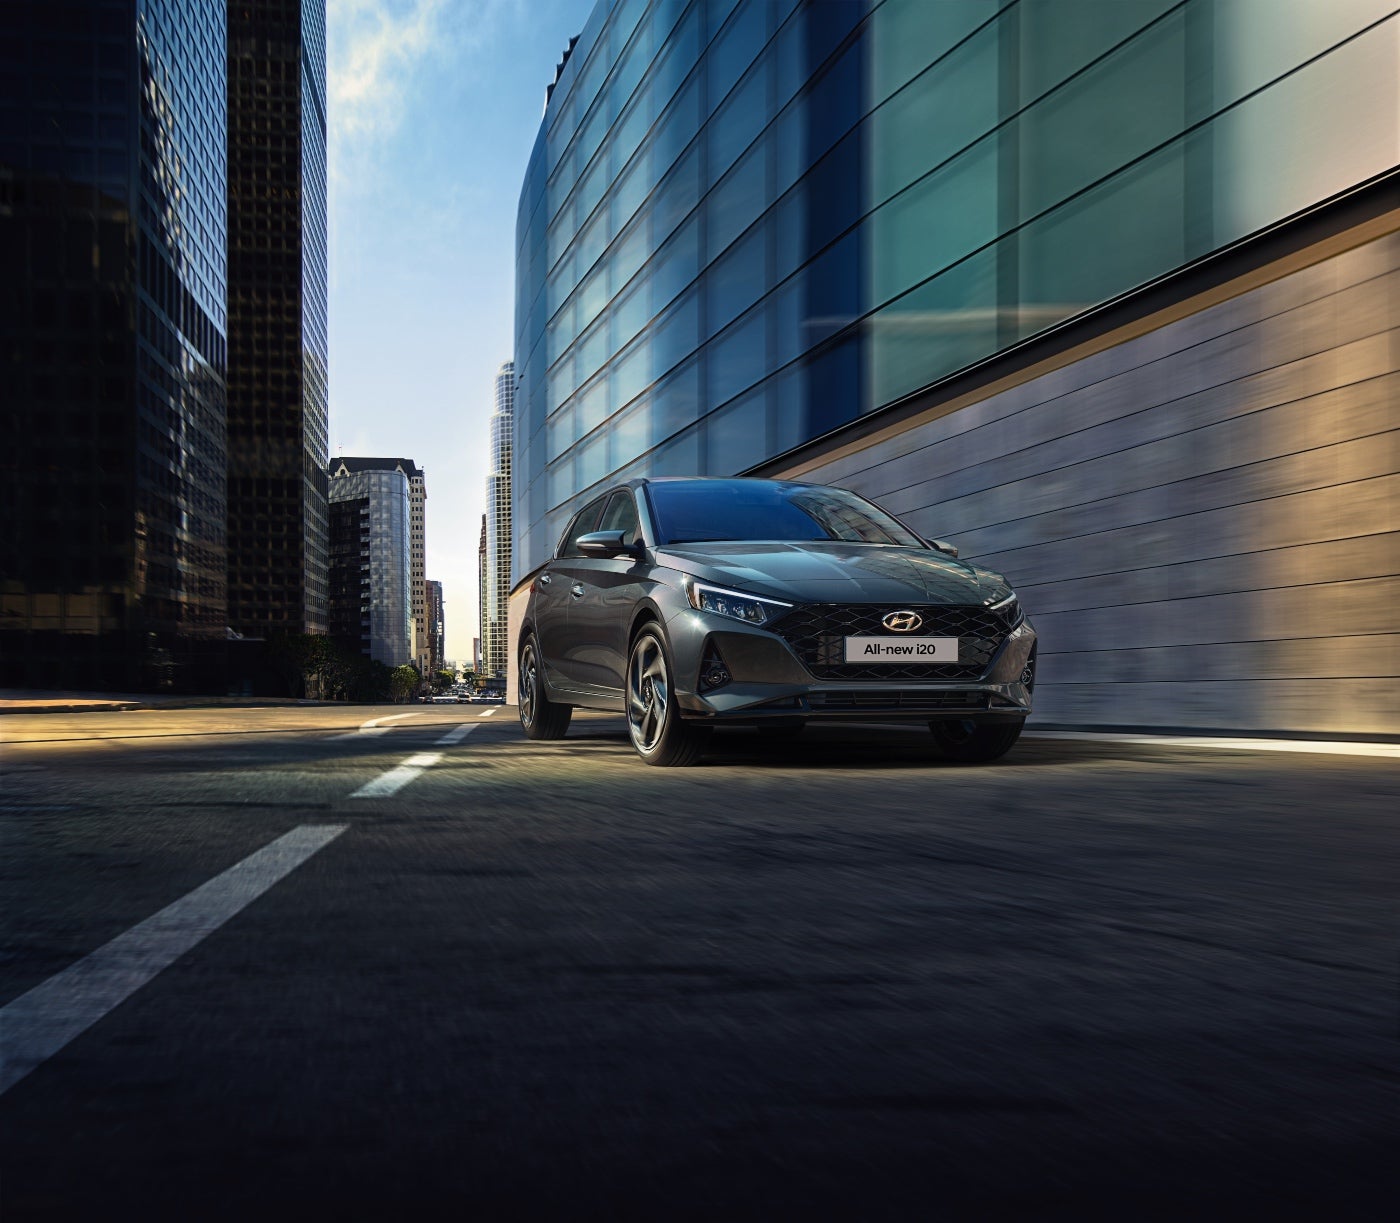 Book your Hyundai i20 test drive today

All i20's come with: